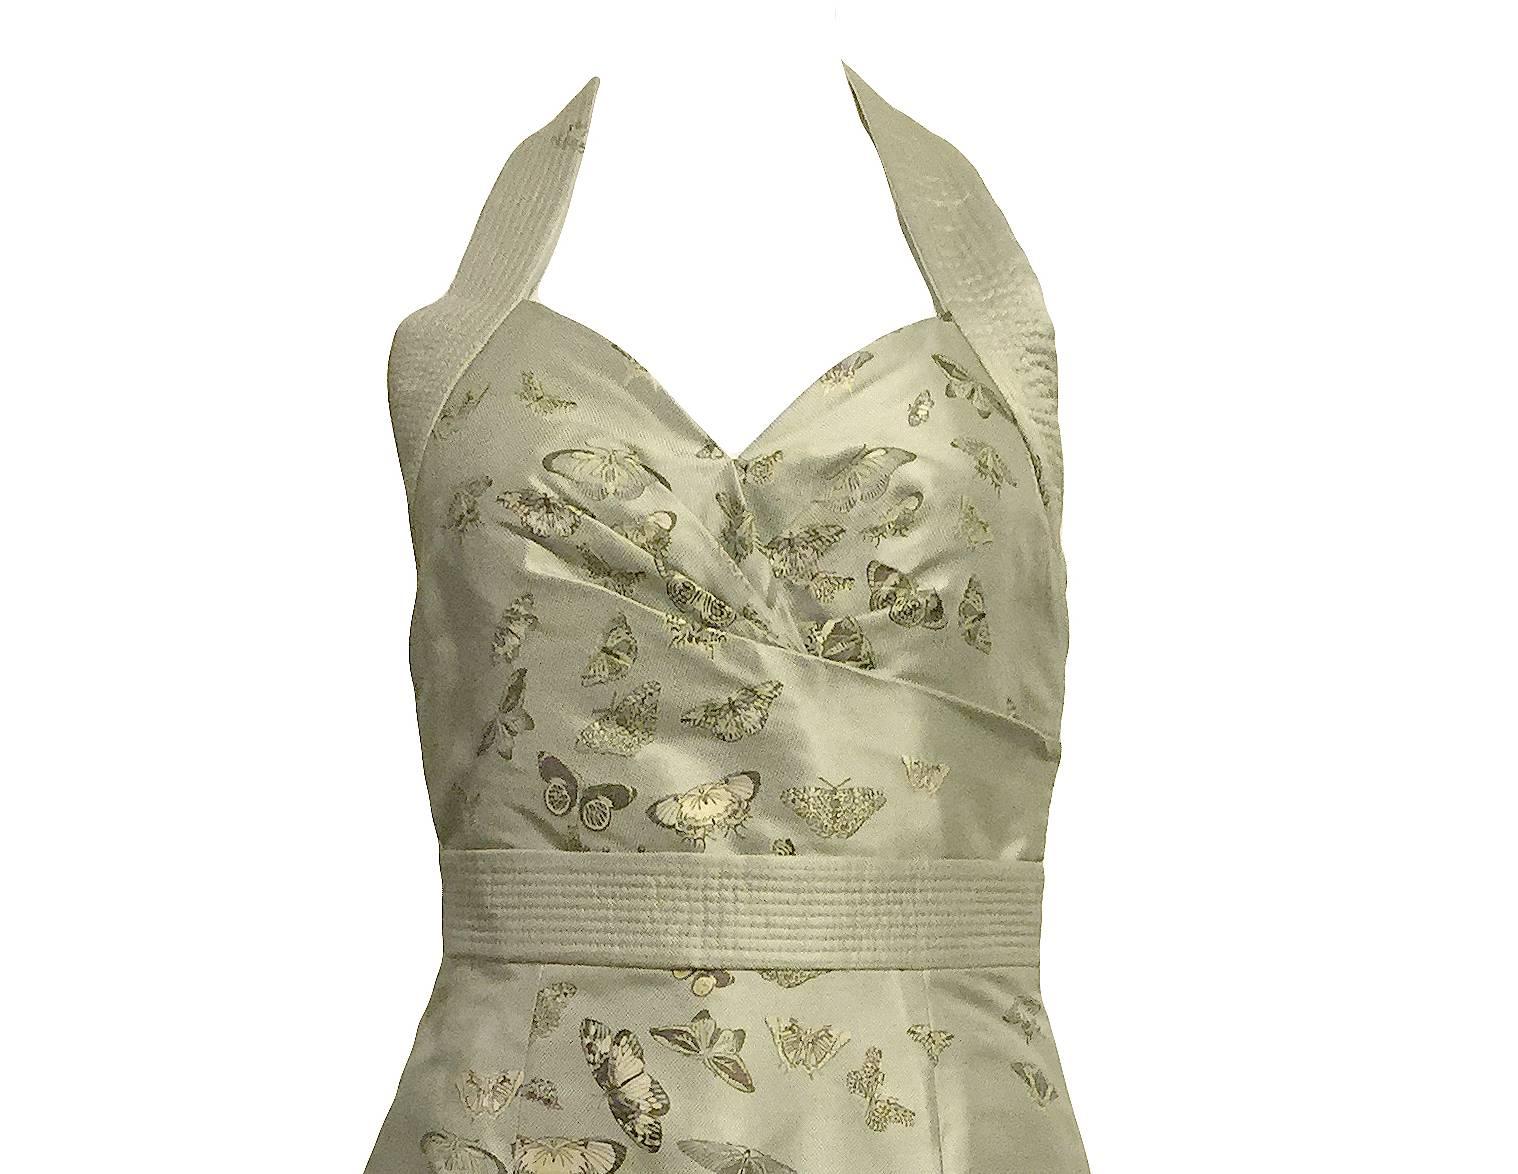 This stunning Alexander McQueen light green silk halter dress is embellished with hand-painted butterflies throughout. It has a side zipper closure and closer at the back of the halter neck. 

Bust 28”, Waist 32”, Hip 34”, Length 37”